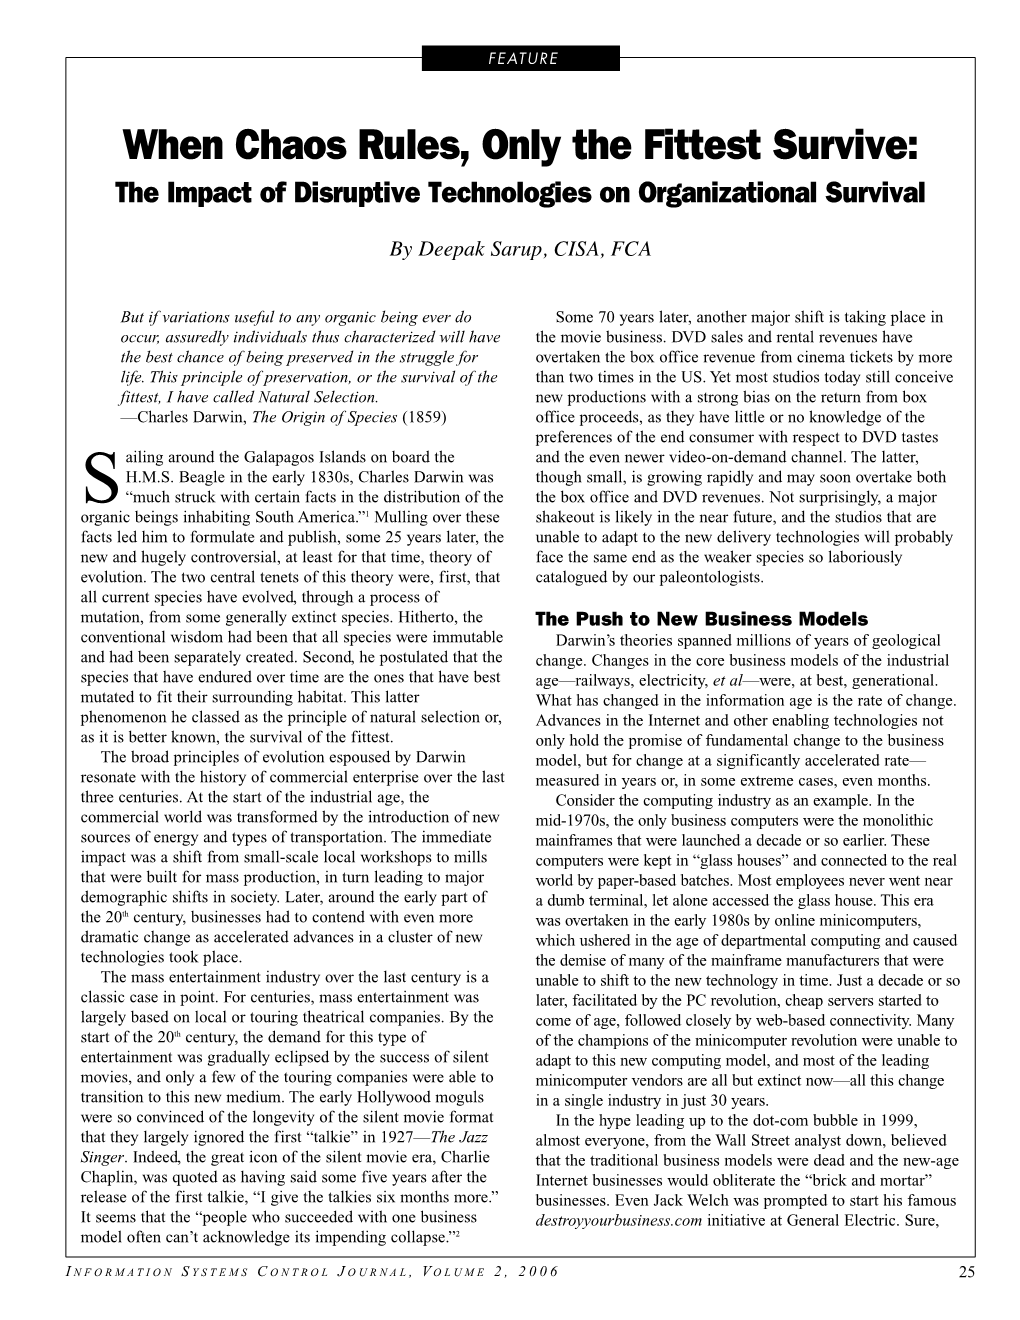 When Chaos Rules, Only the Fittest Survive: the Impact of Disruptive Technologies on Organizational Survival